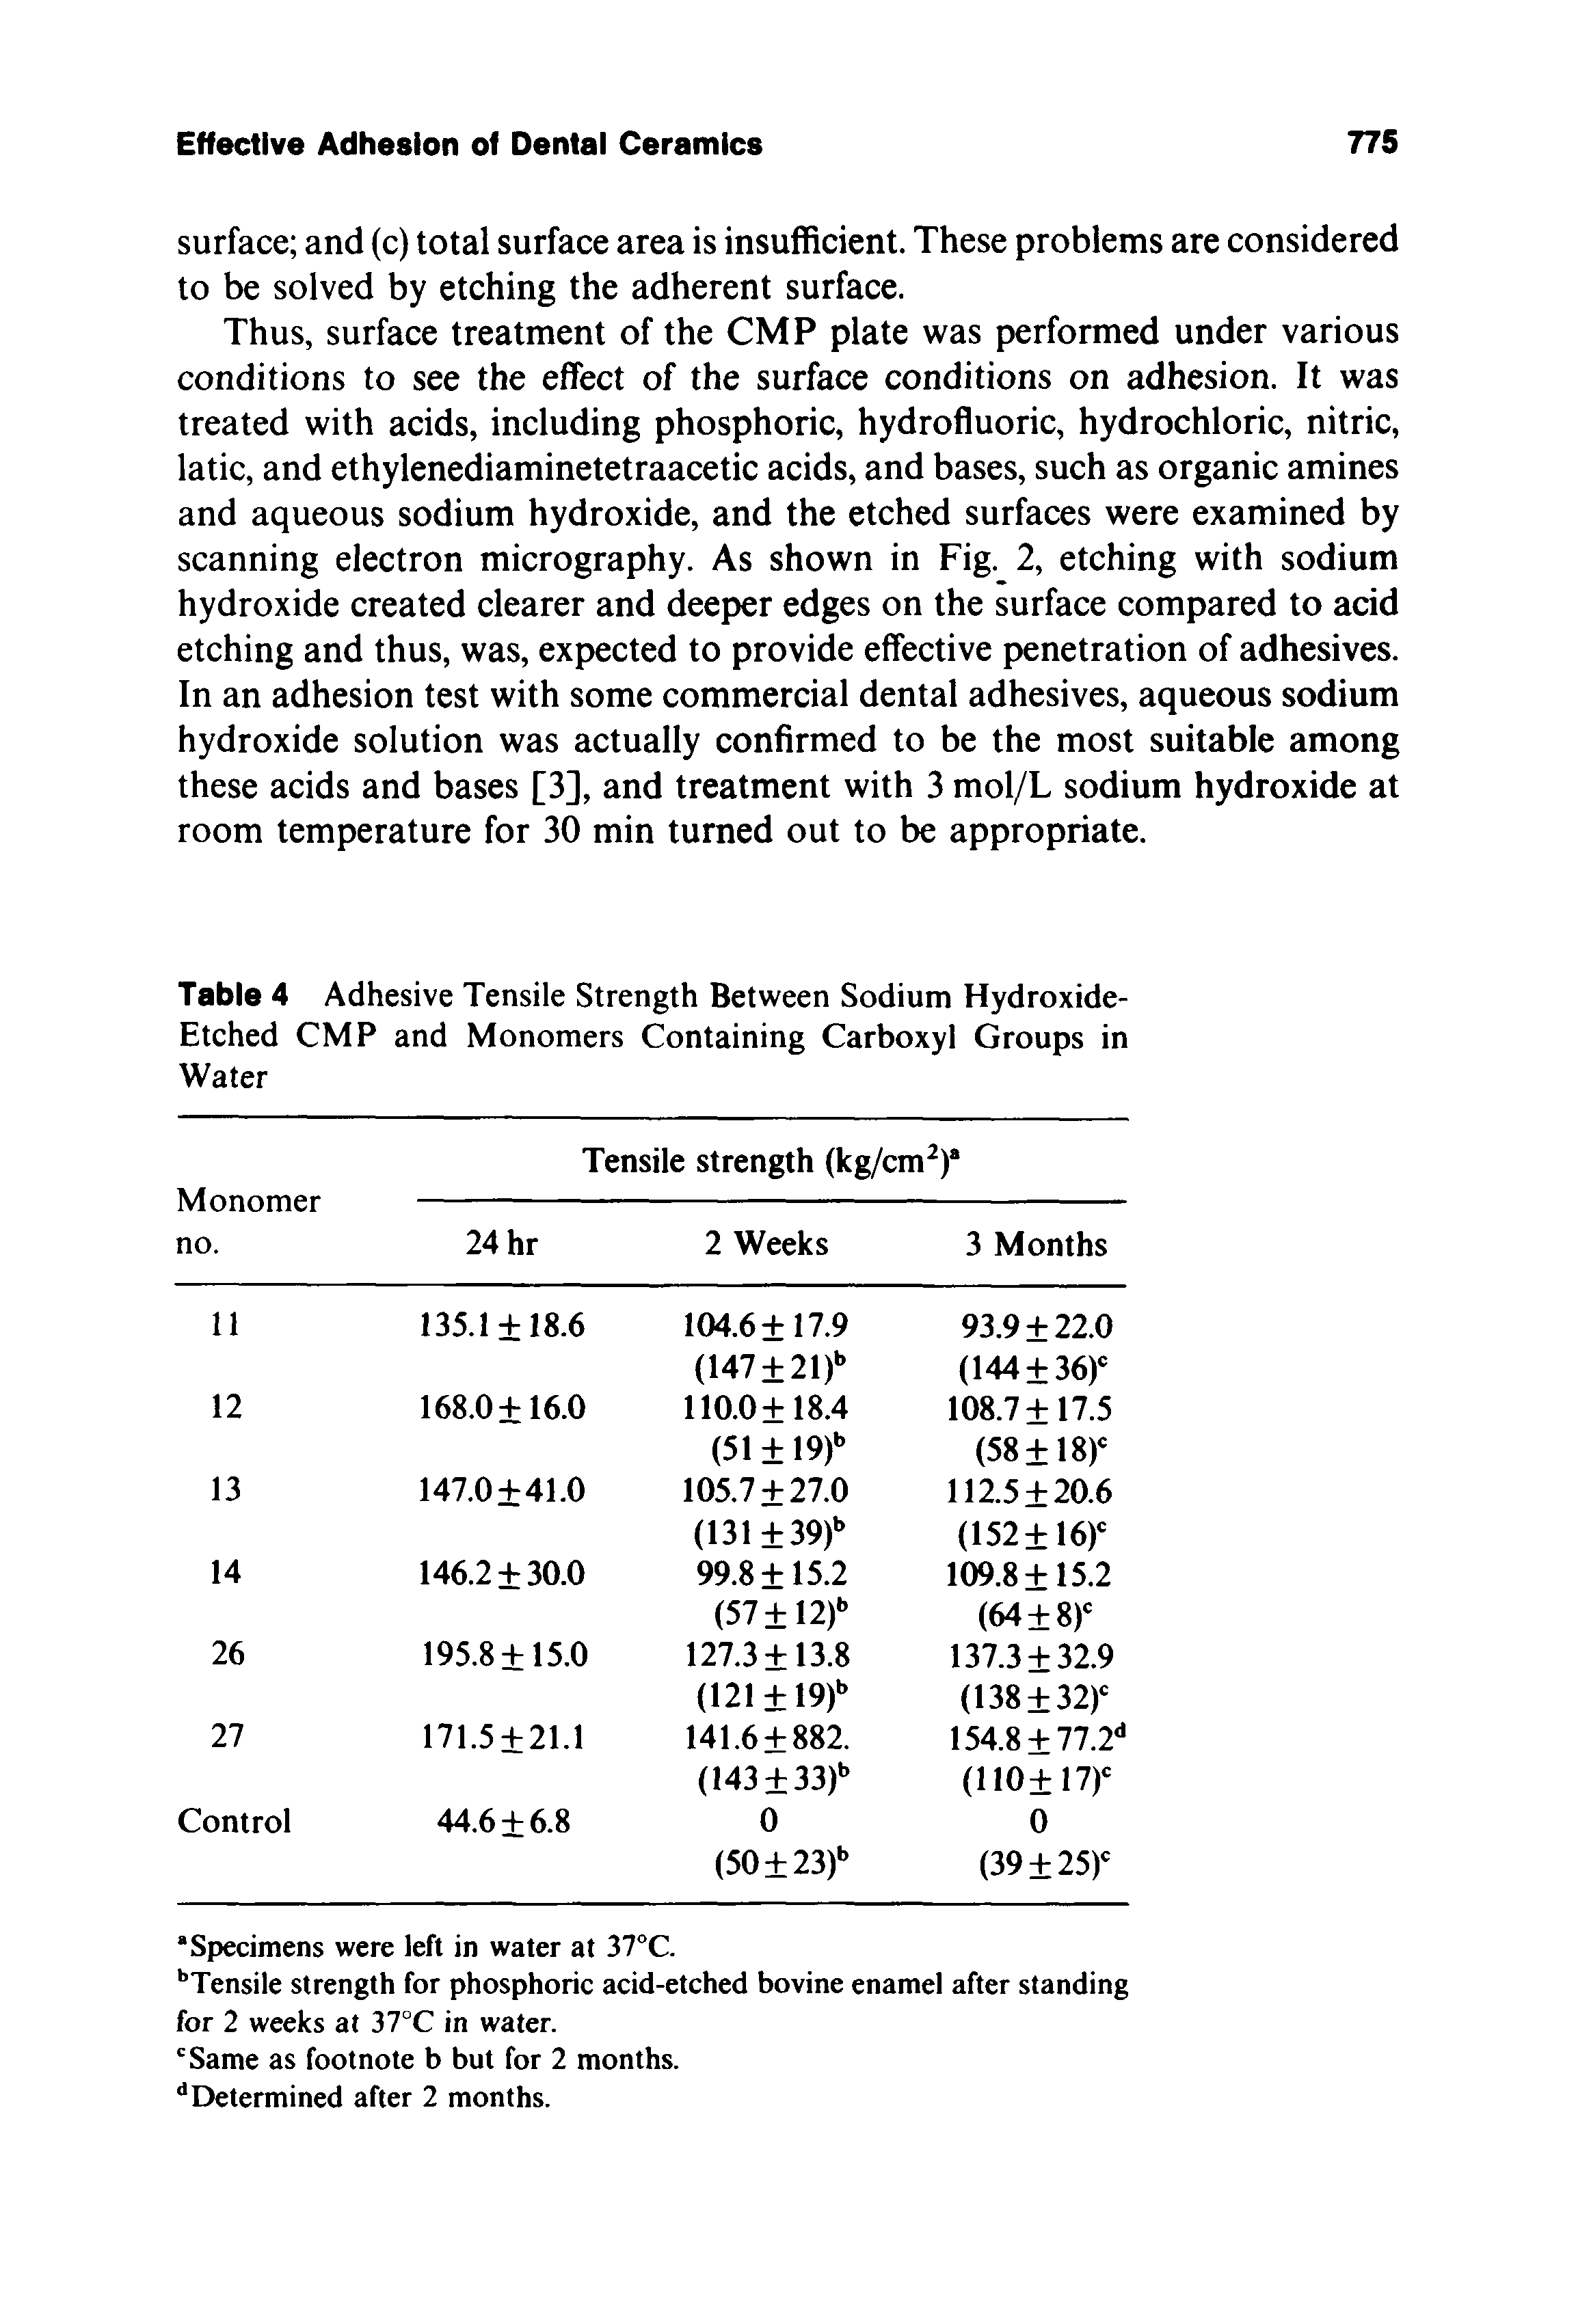 Table 4 Adhesive Tensile Strength Between Sodium Hydroxide-Etched CMP and Monomers Containing Carboxyl Groups in Water...